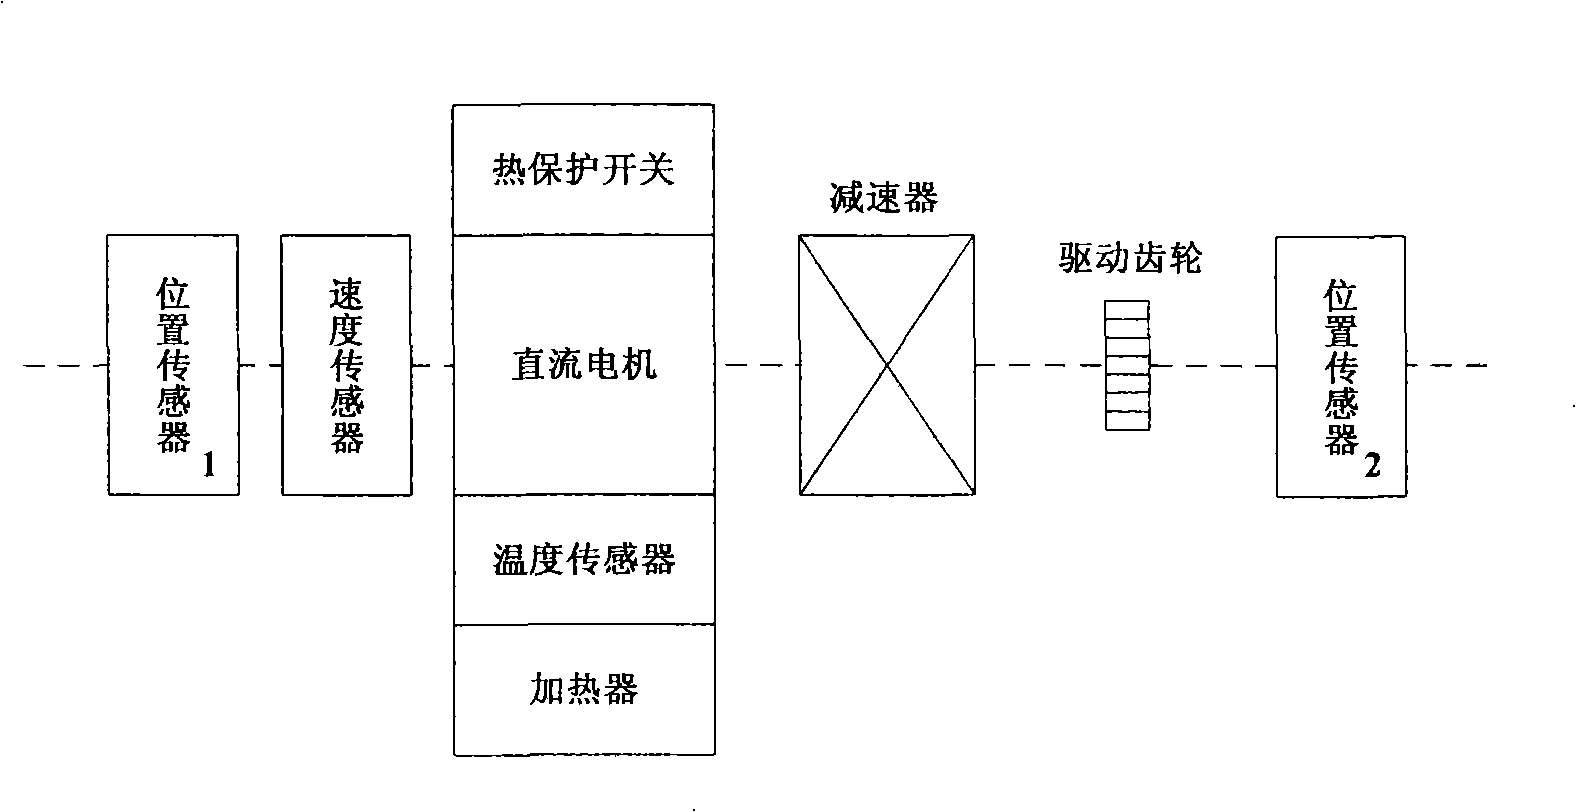 Pitch control system of wind mill generator